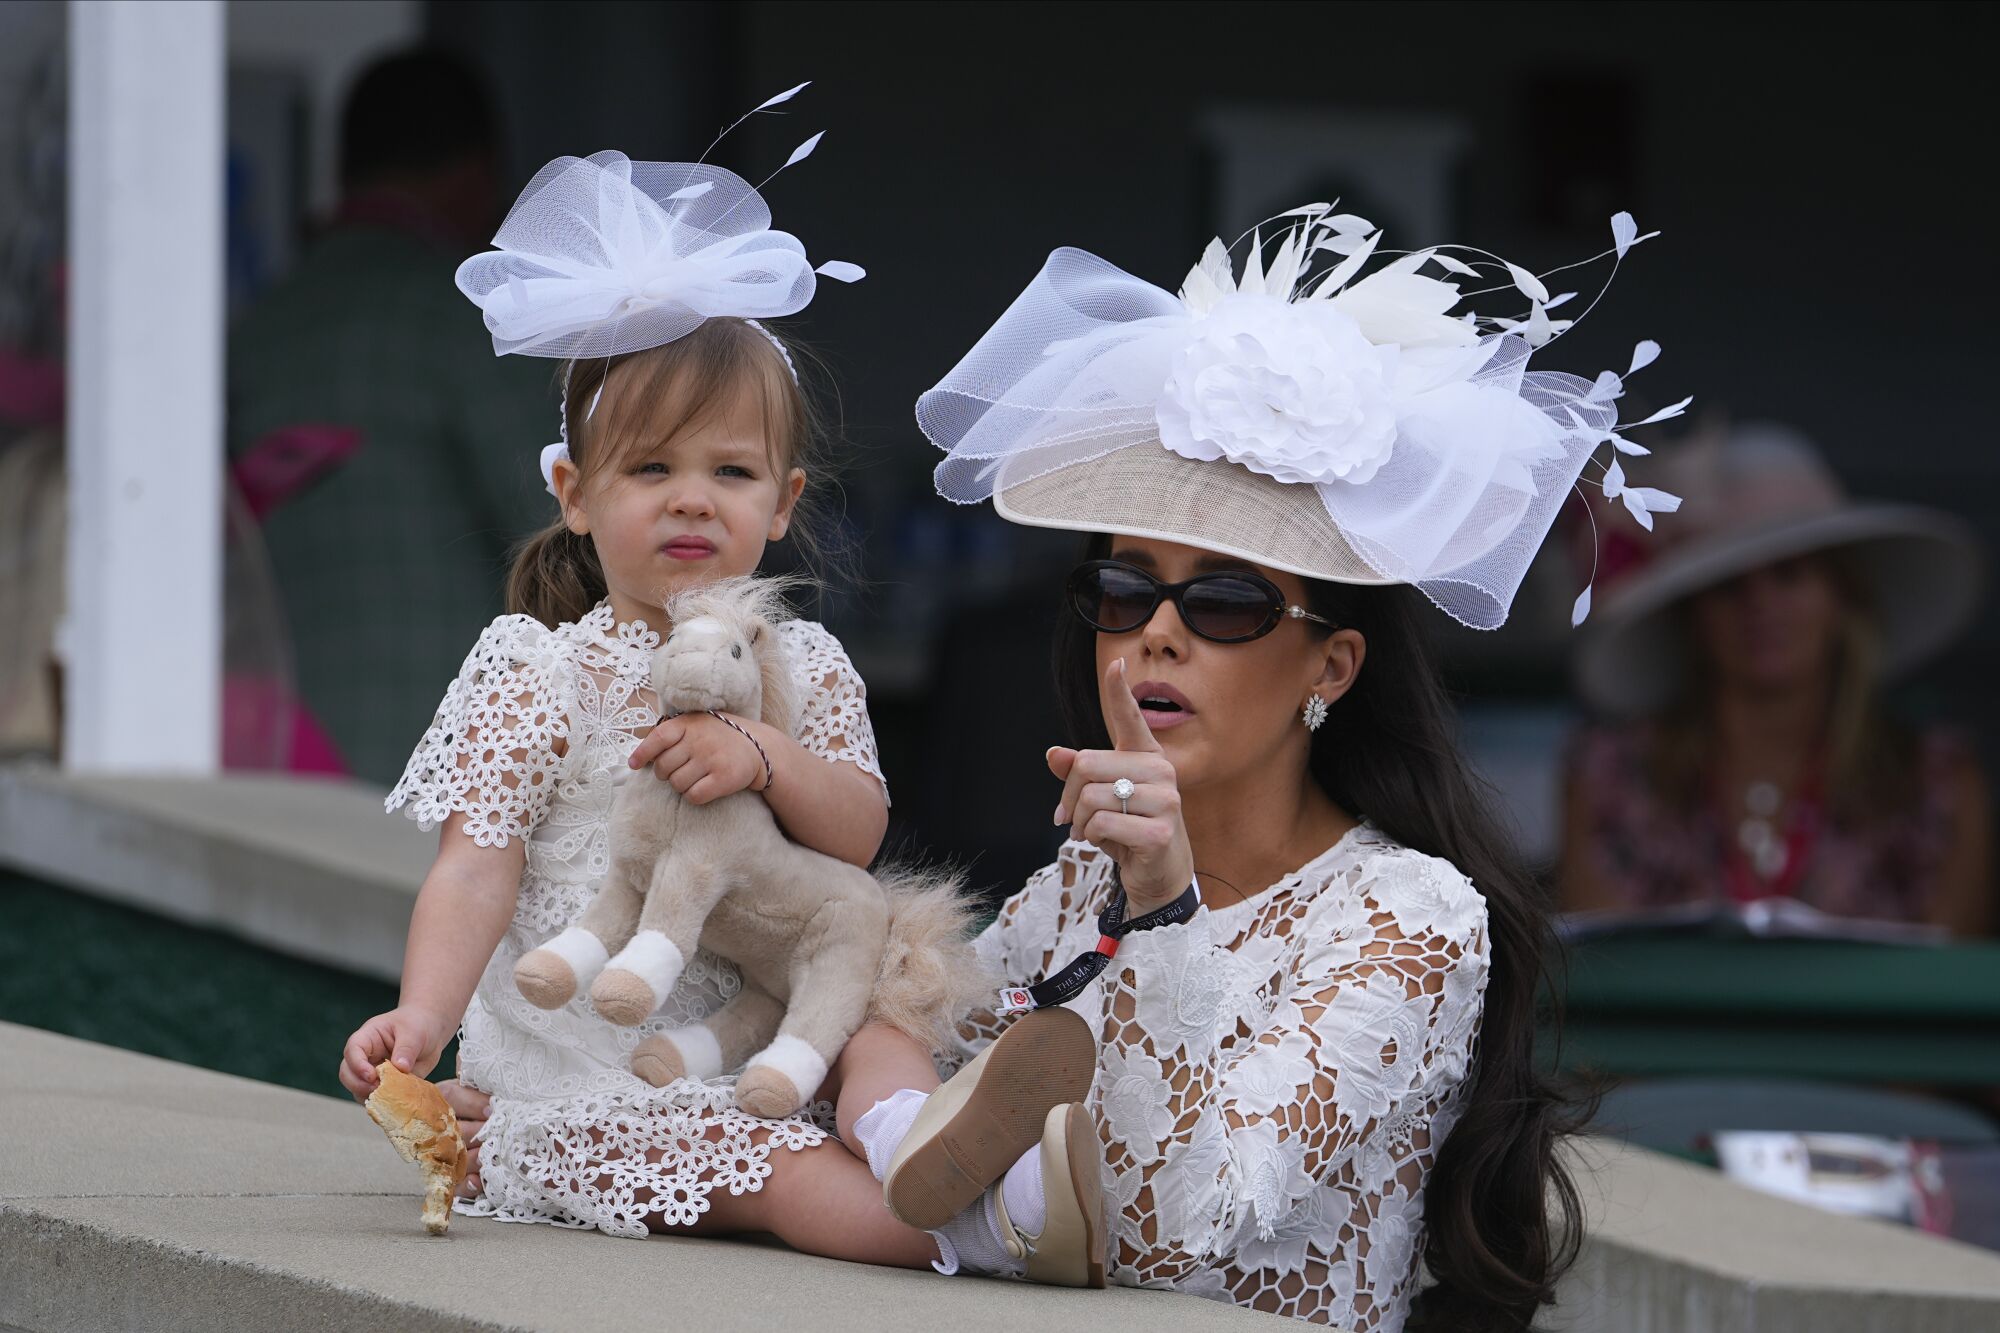 A woman and child wearing hats with distinct decorations wait at Churchill Downs